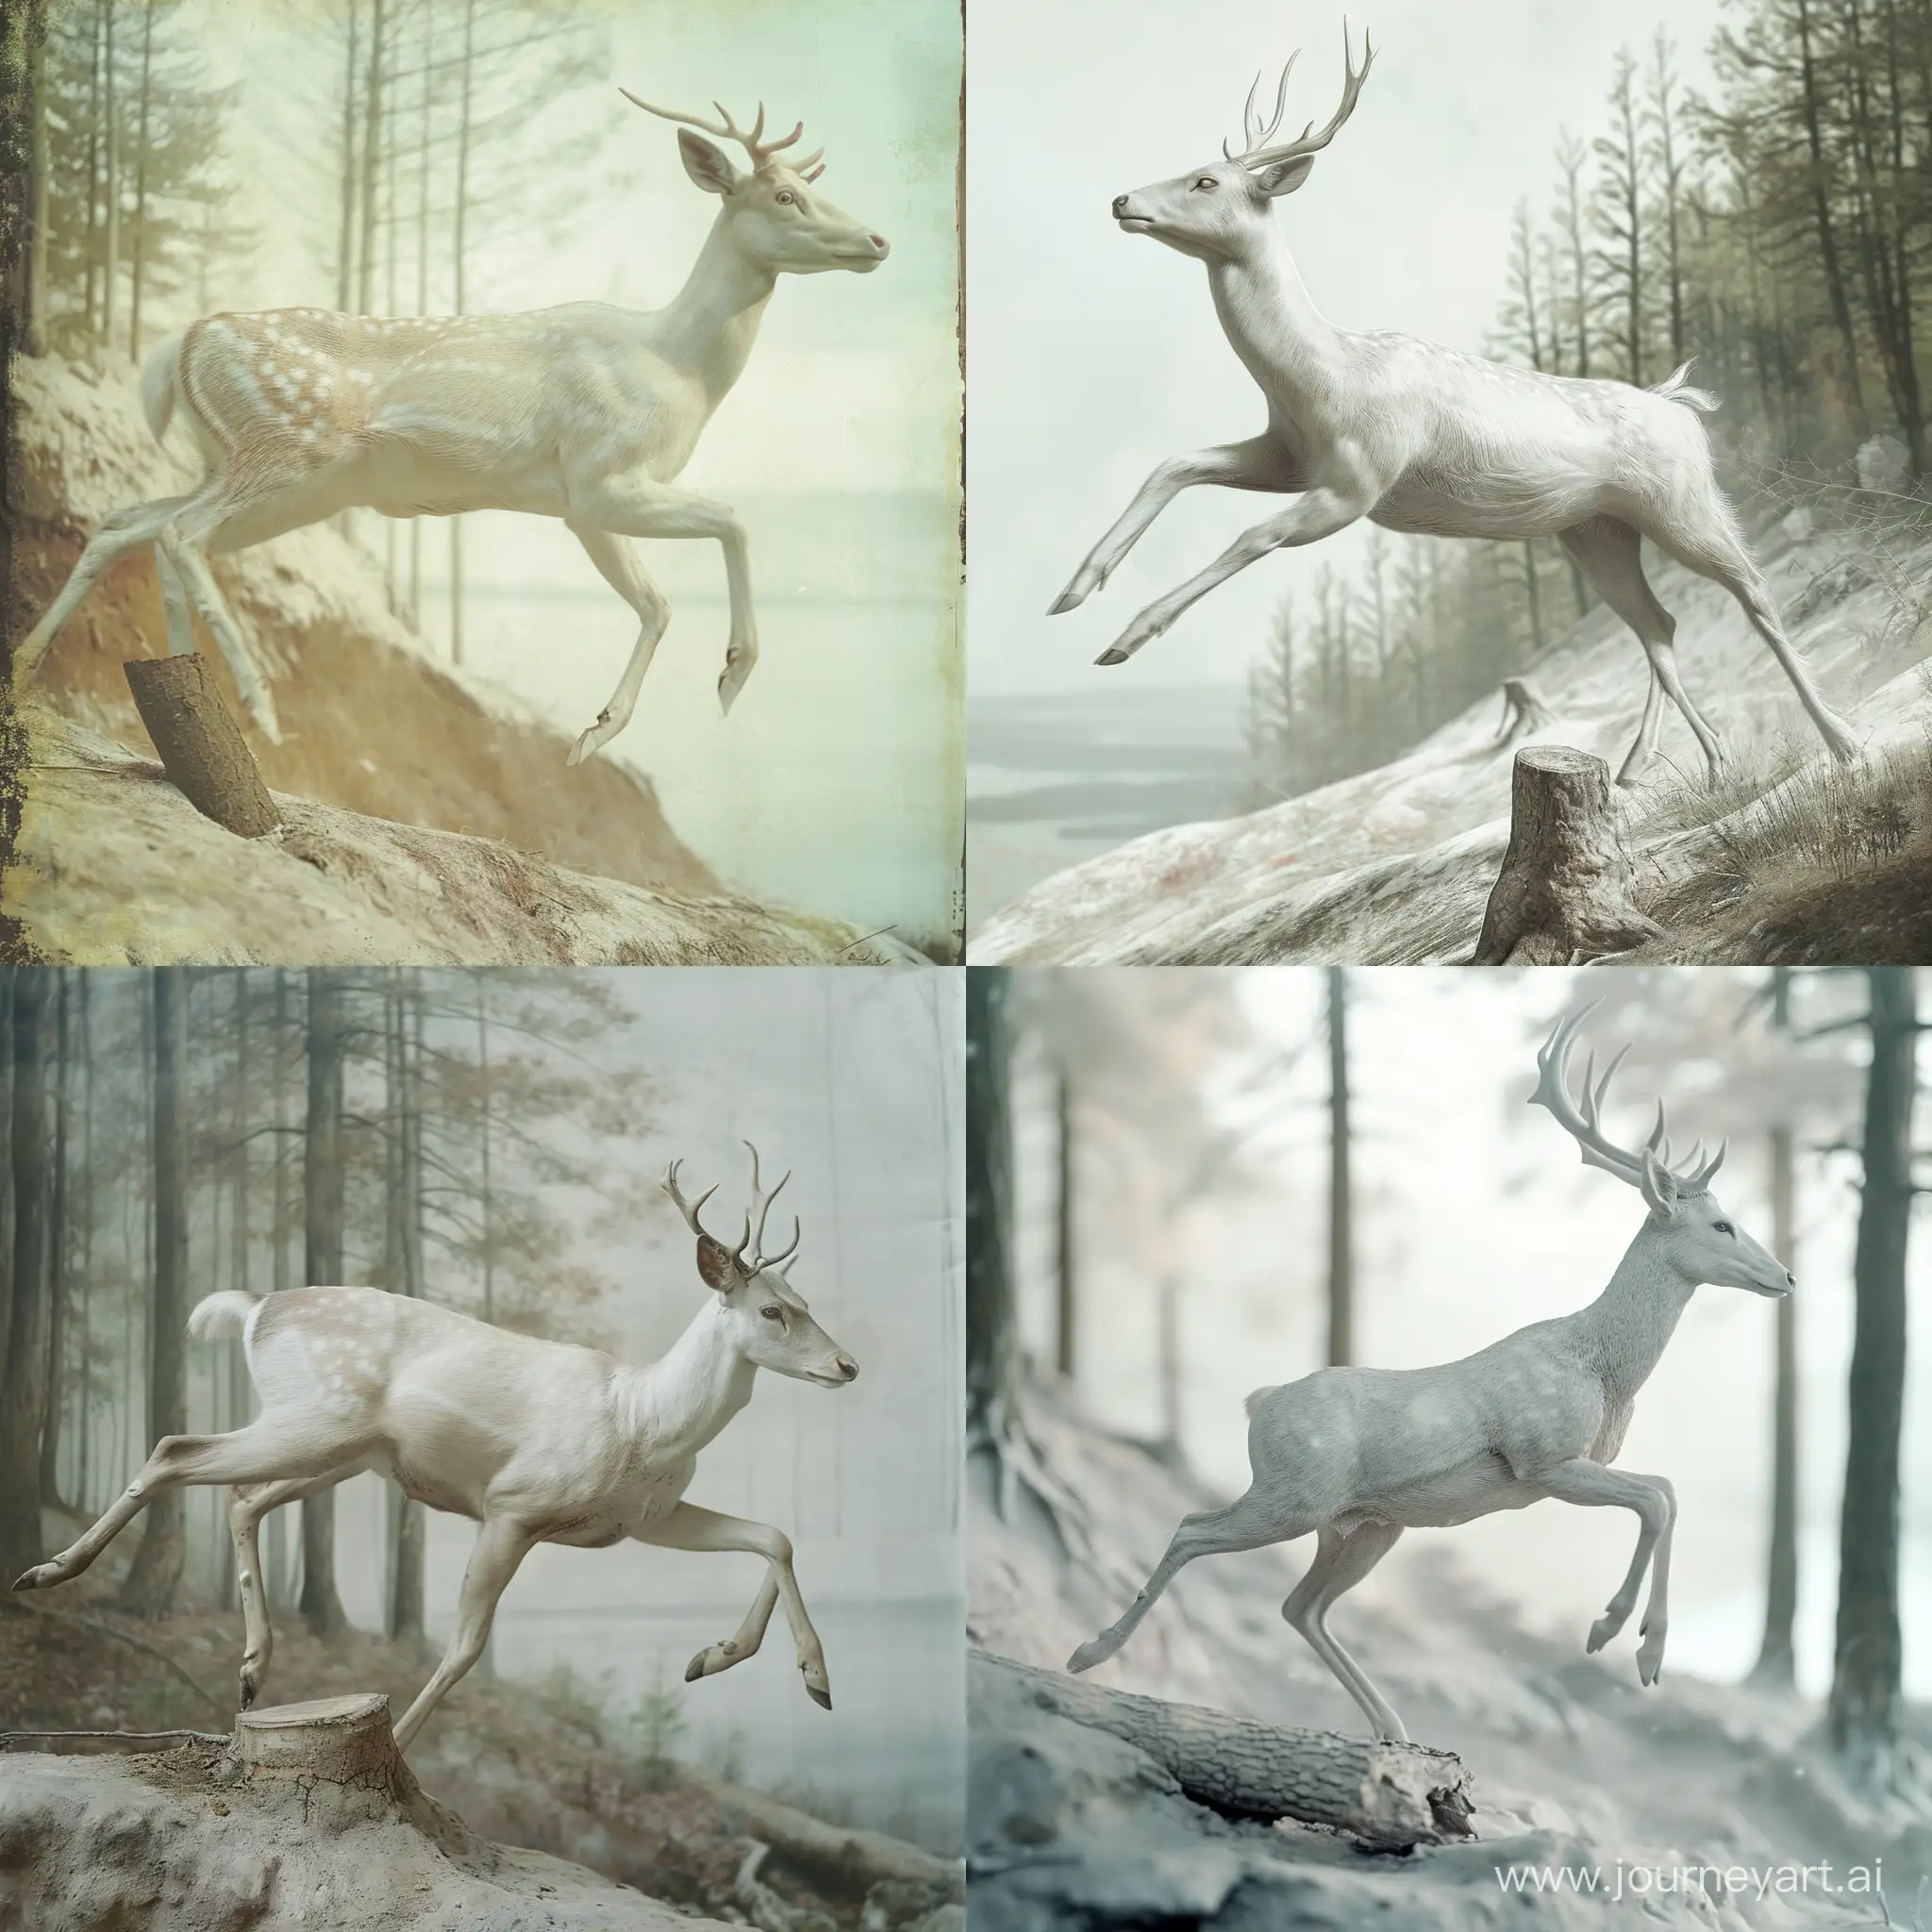 Graceful-White-Deer-poised-for-a-Leap-in-Enchanting-Forest-Scene